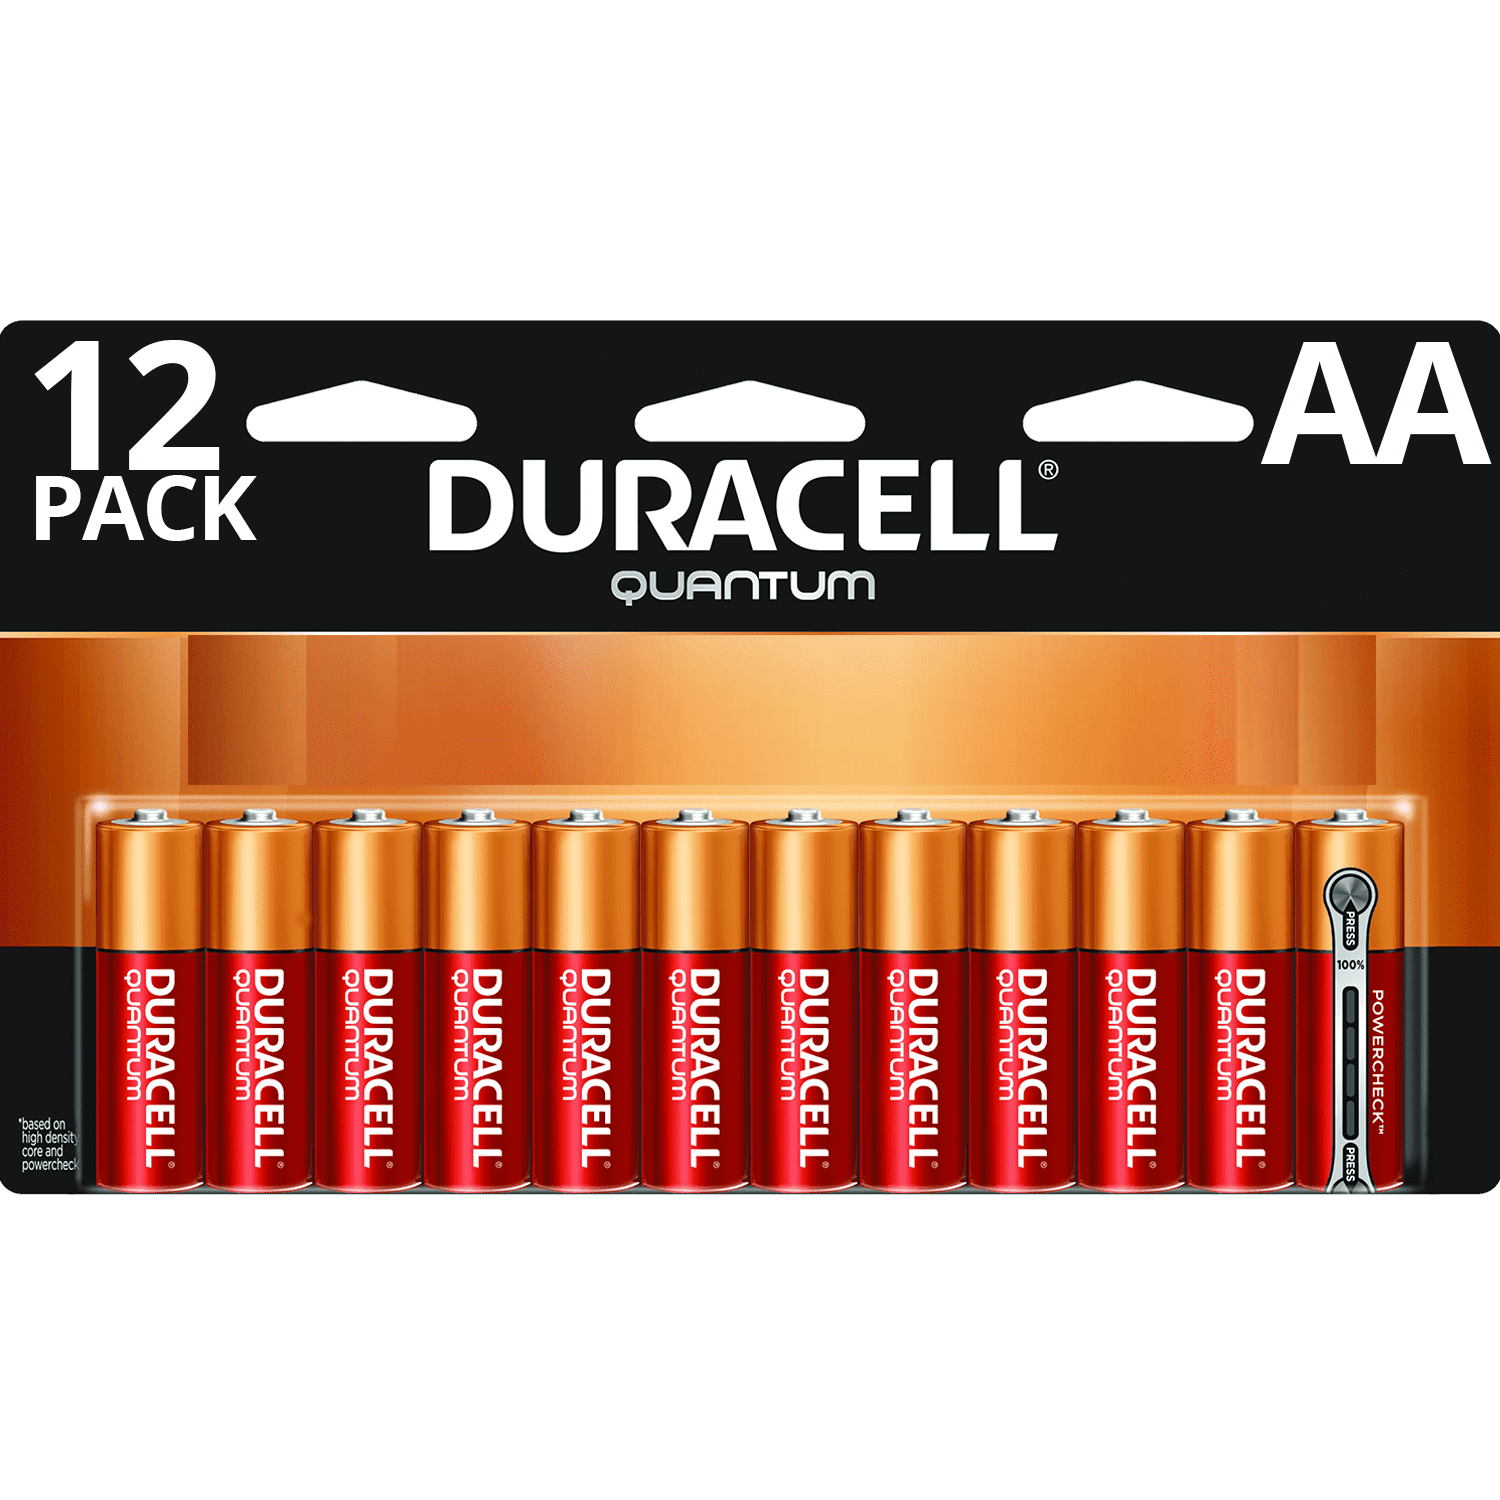 Duracell Quantum Alkaline AA Batteries with PowerCheck, 12 Pack .